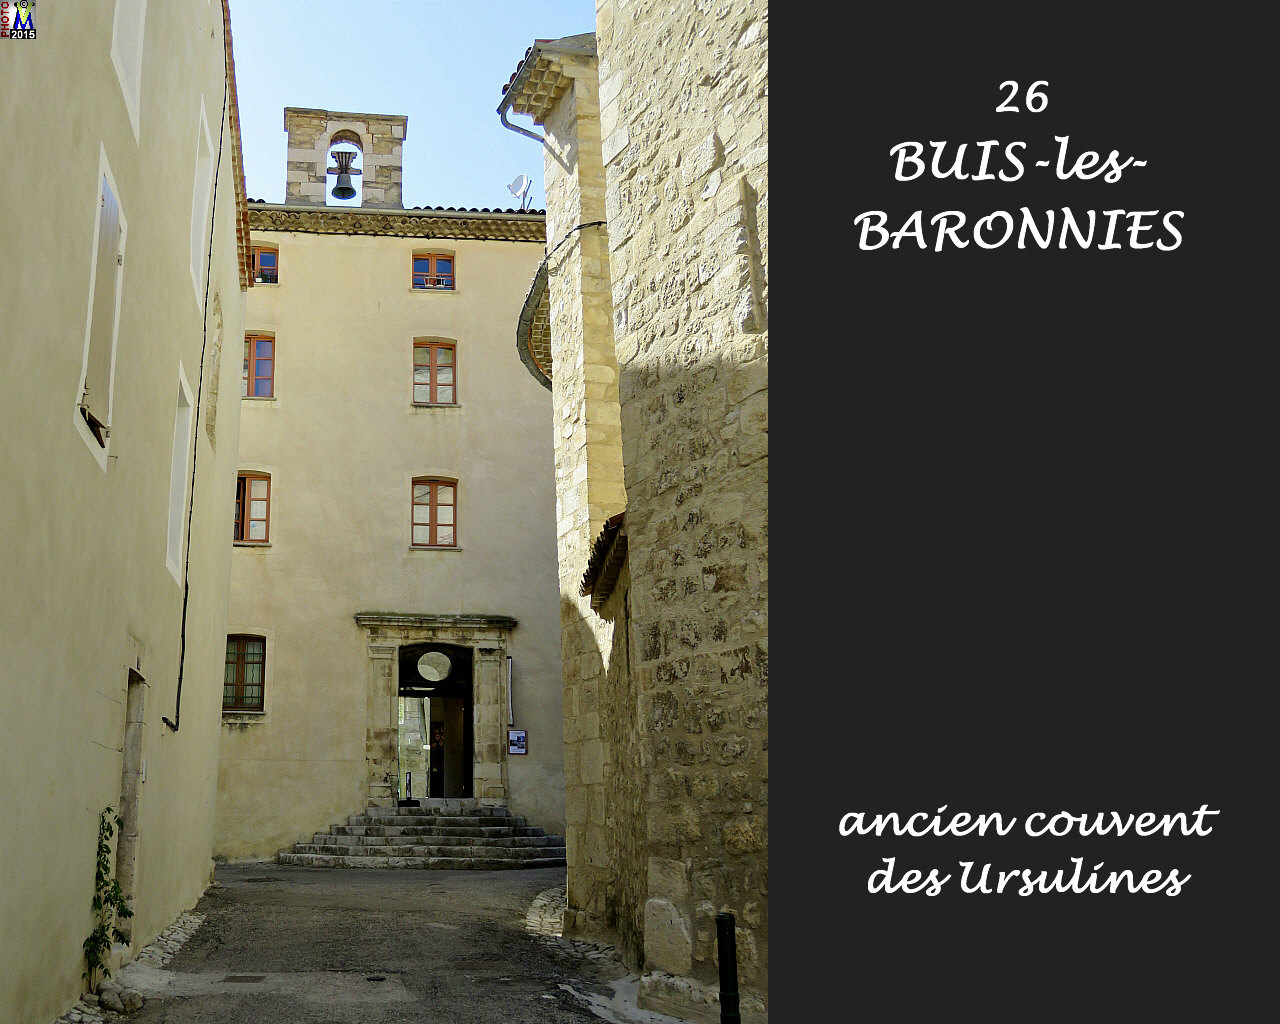 26BUIS-BARONNIES_couvent_100.jpg